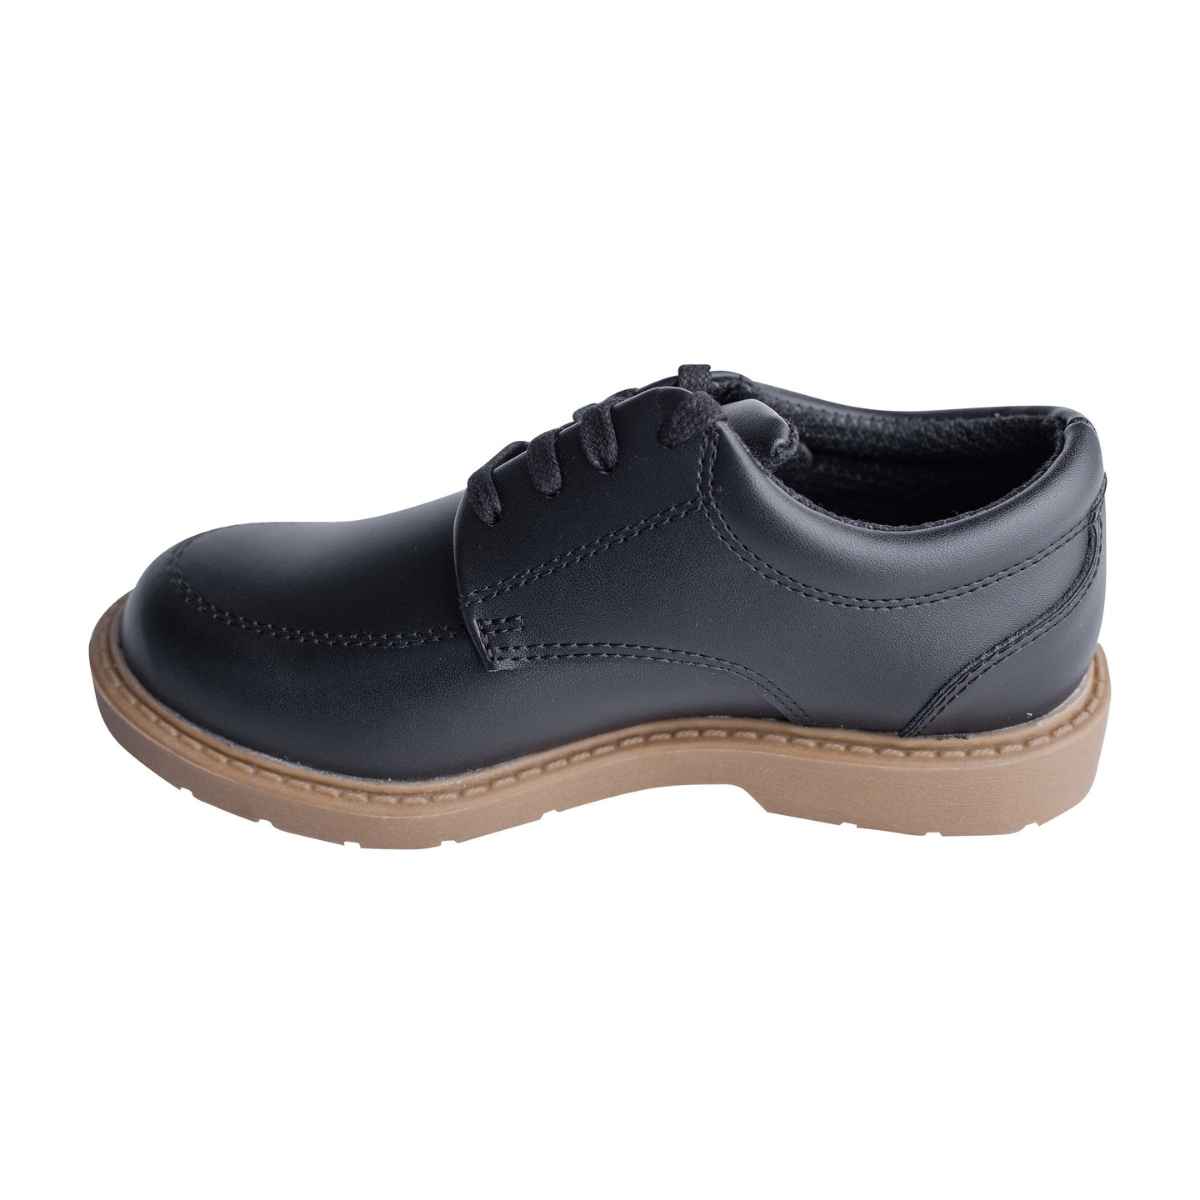 Graduate II Youth Black Leather Oxfords